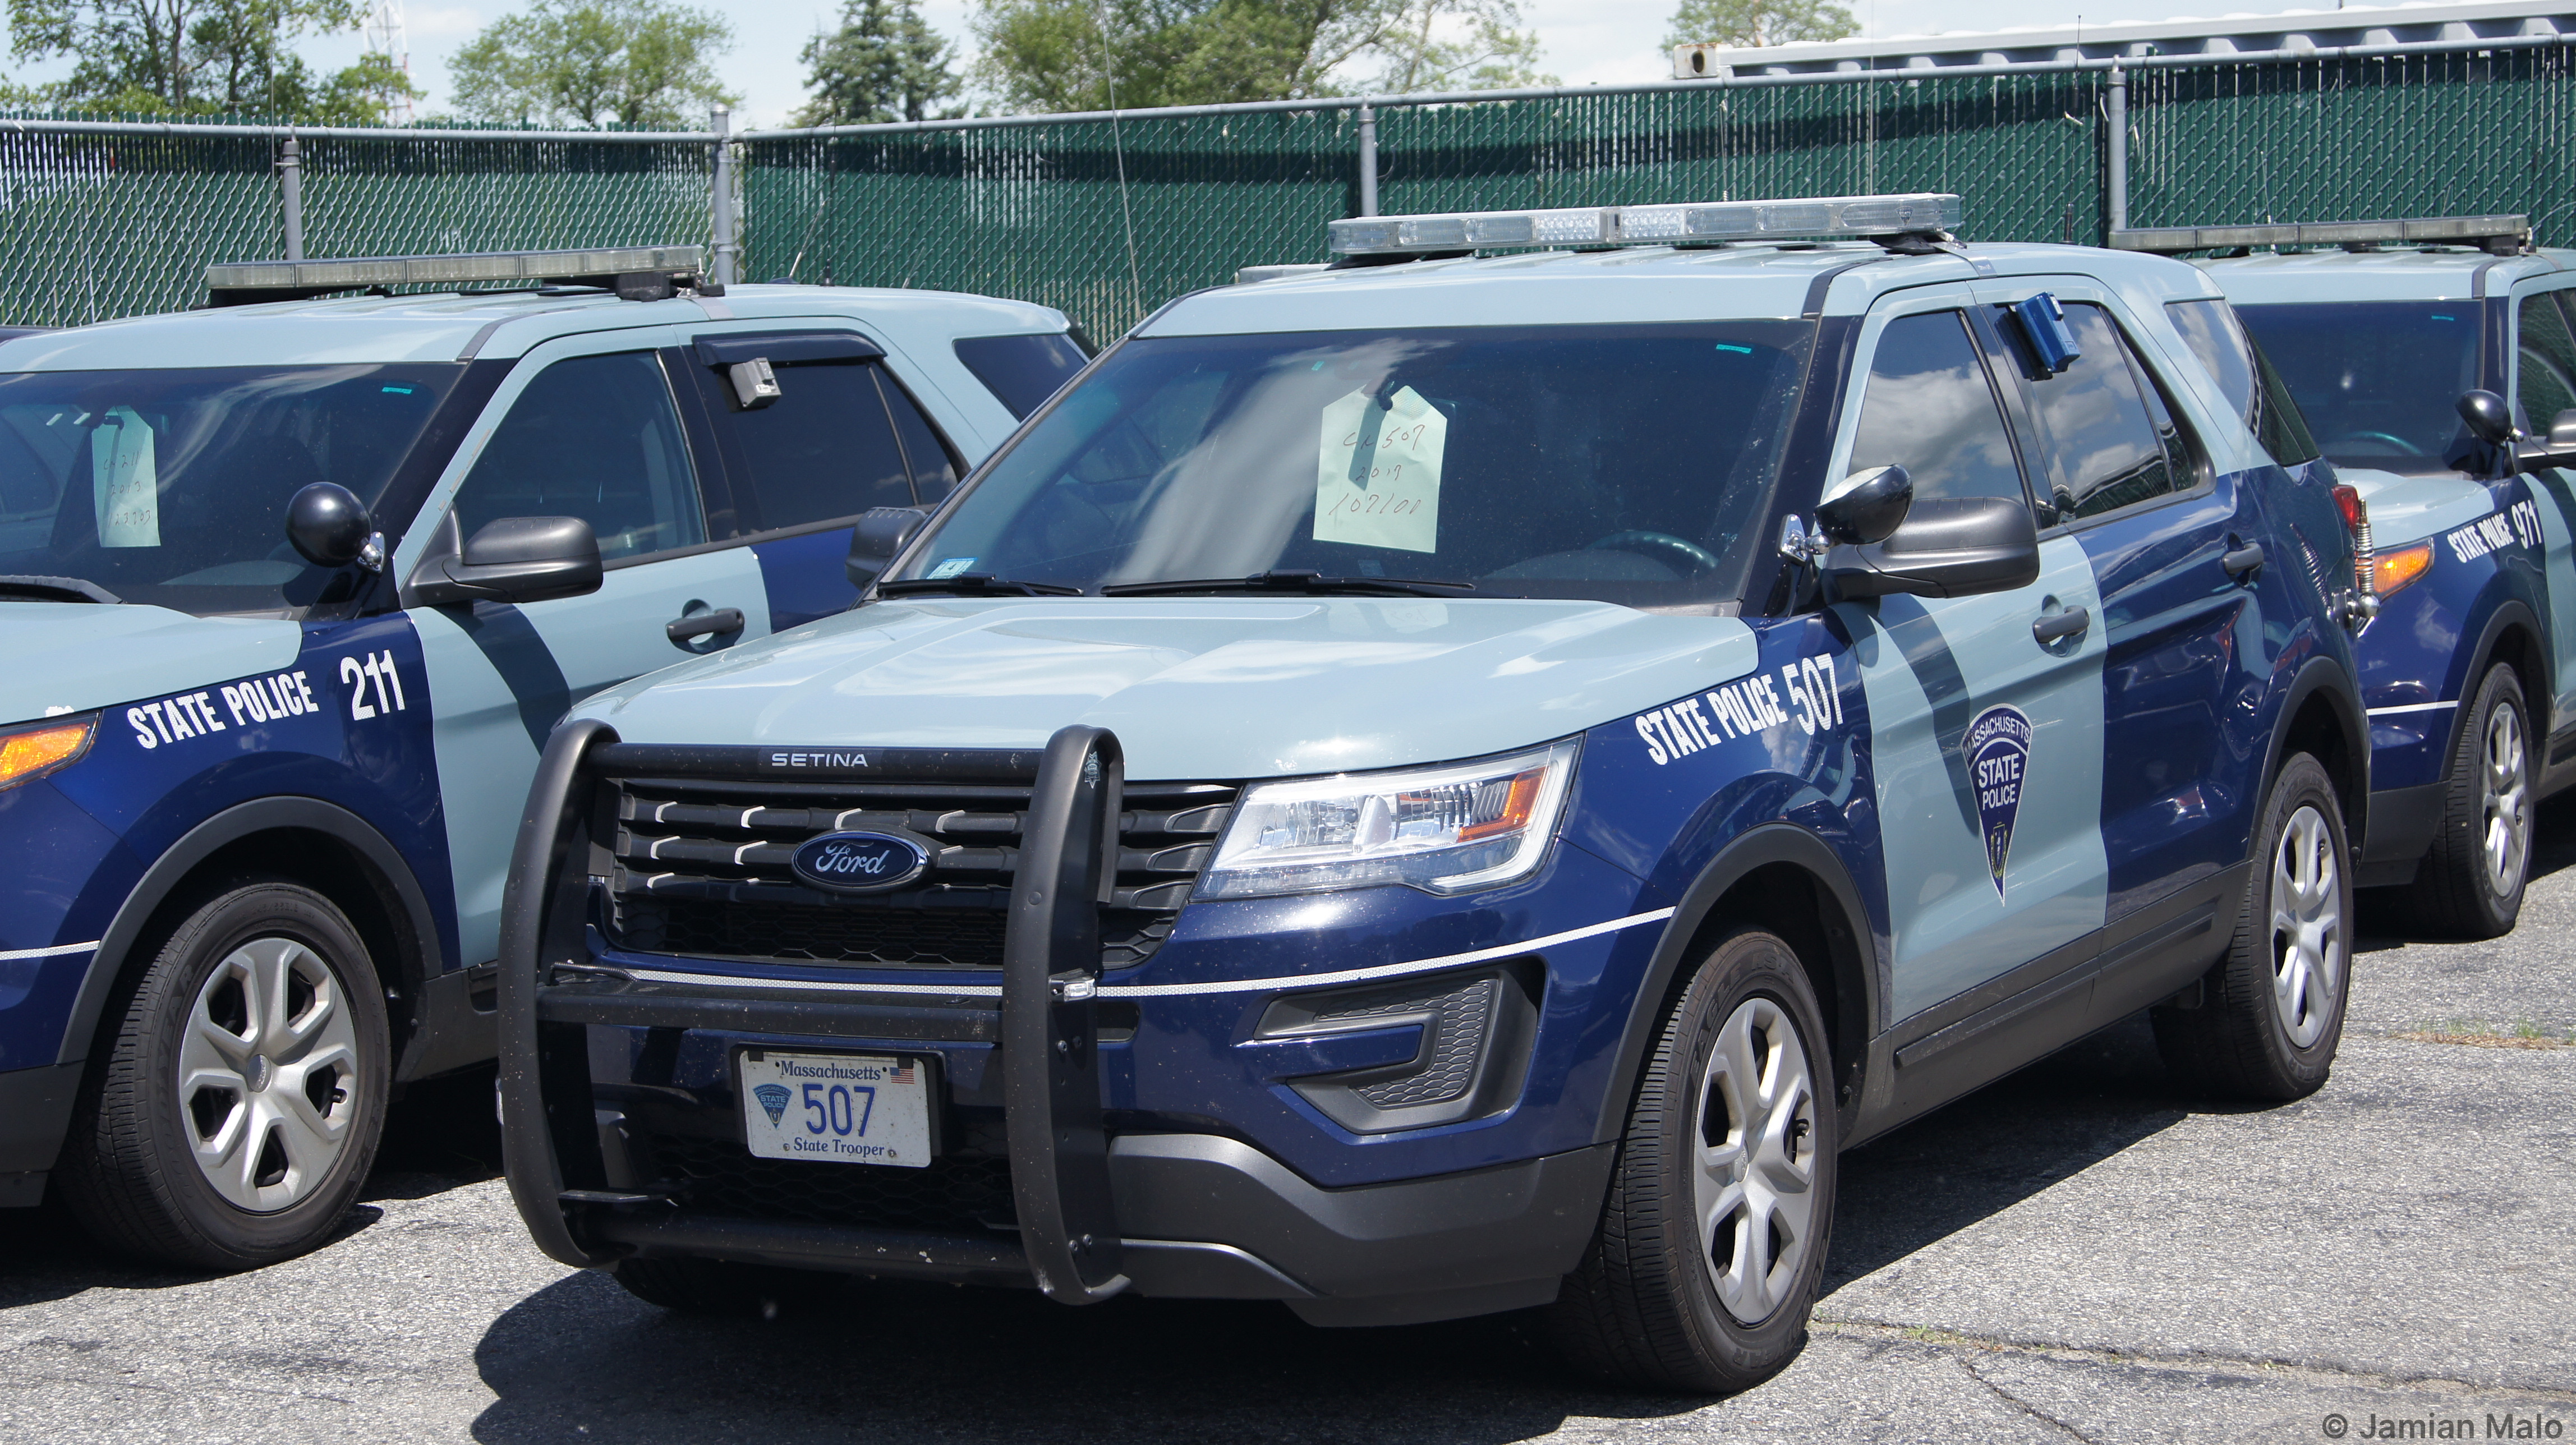 A photo  of Massachusetts State Police
            Cruiser 507, a 2016-2019 Ford Police Interceptor Utility             taken by Jamian Malo